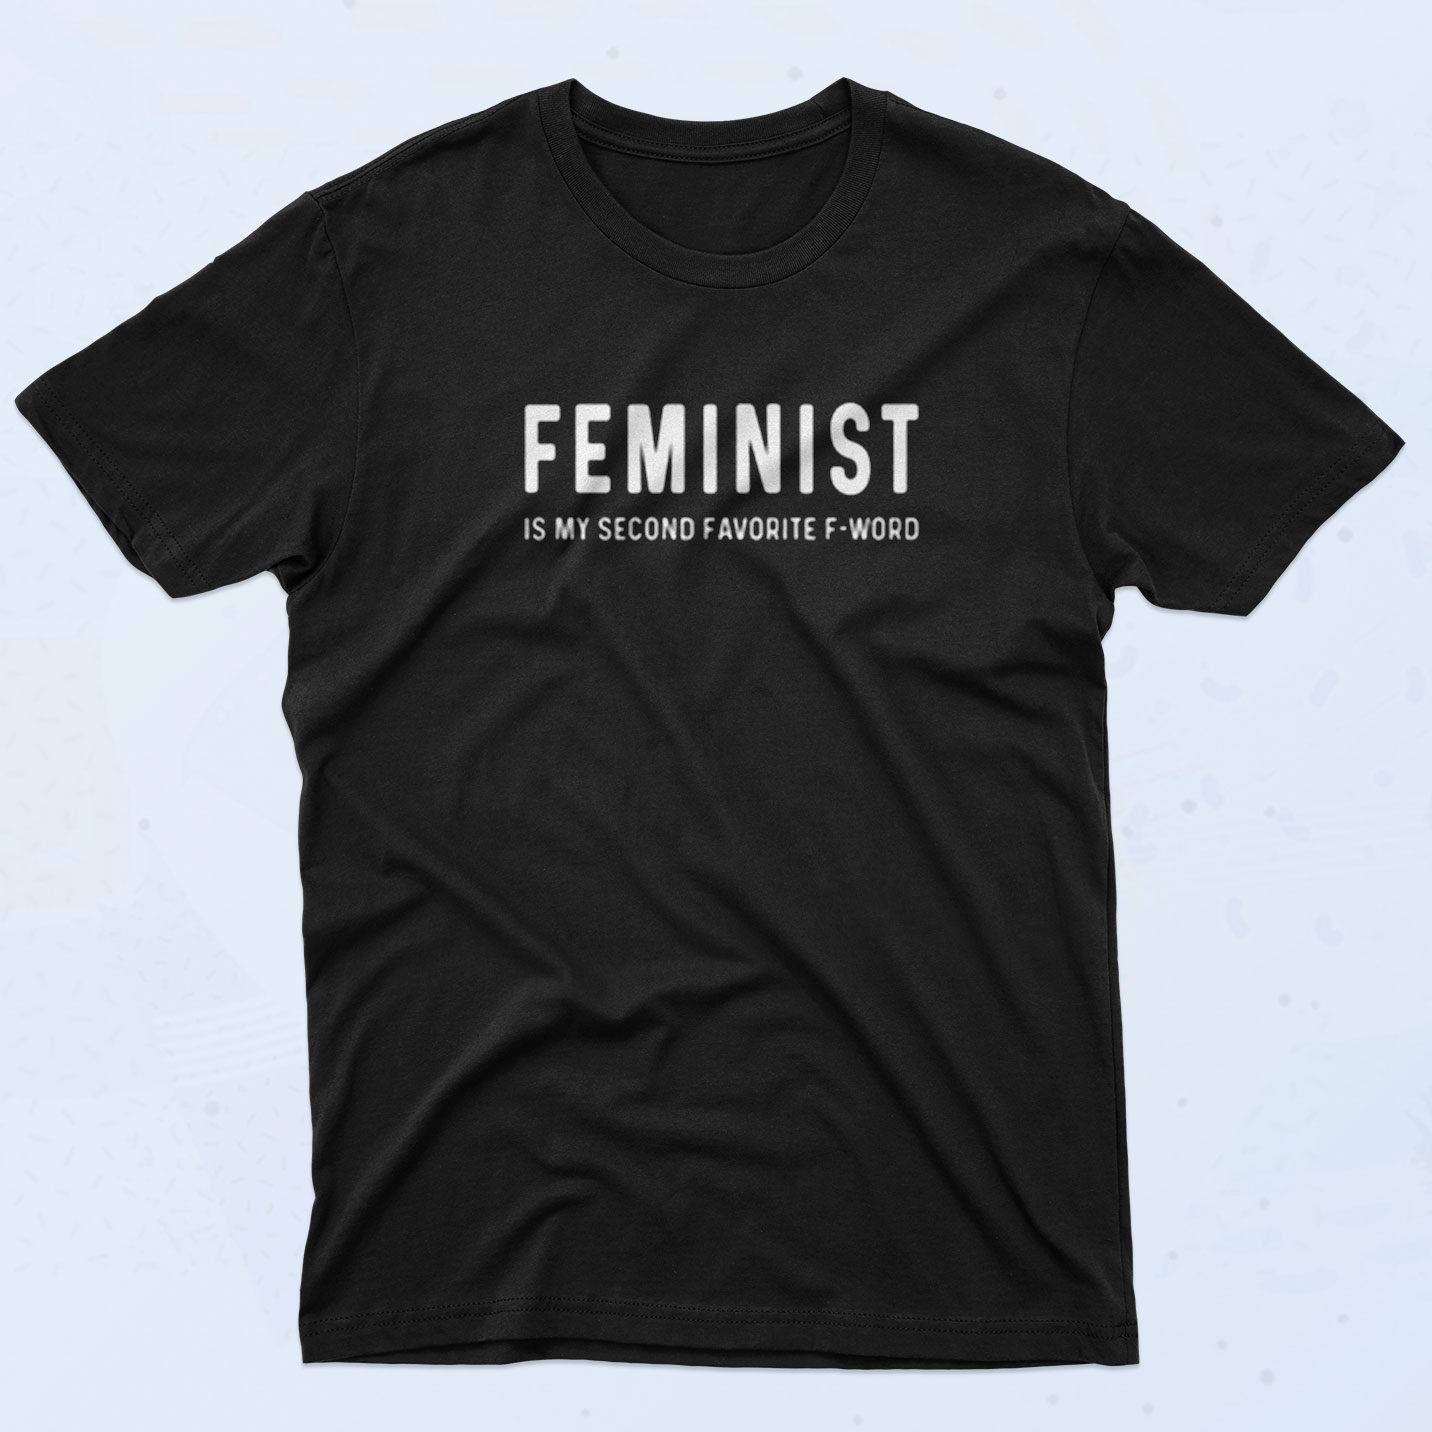 Feminist 90s T Shirt Style - 90sclothes.com